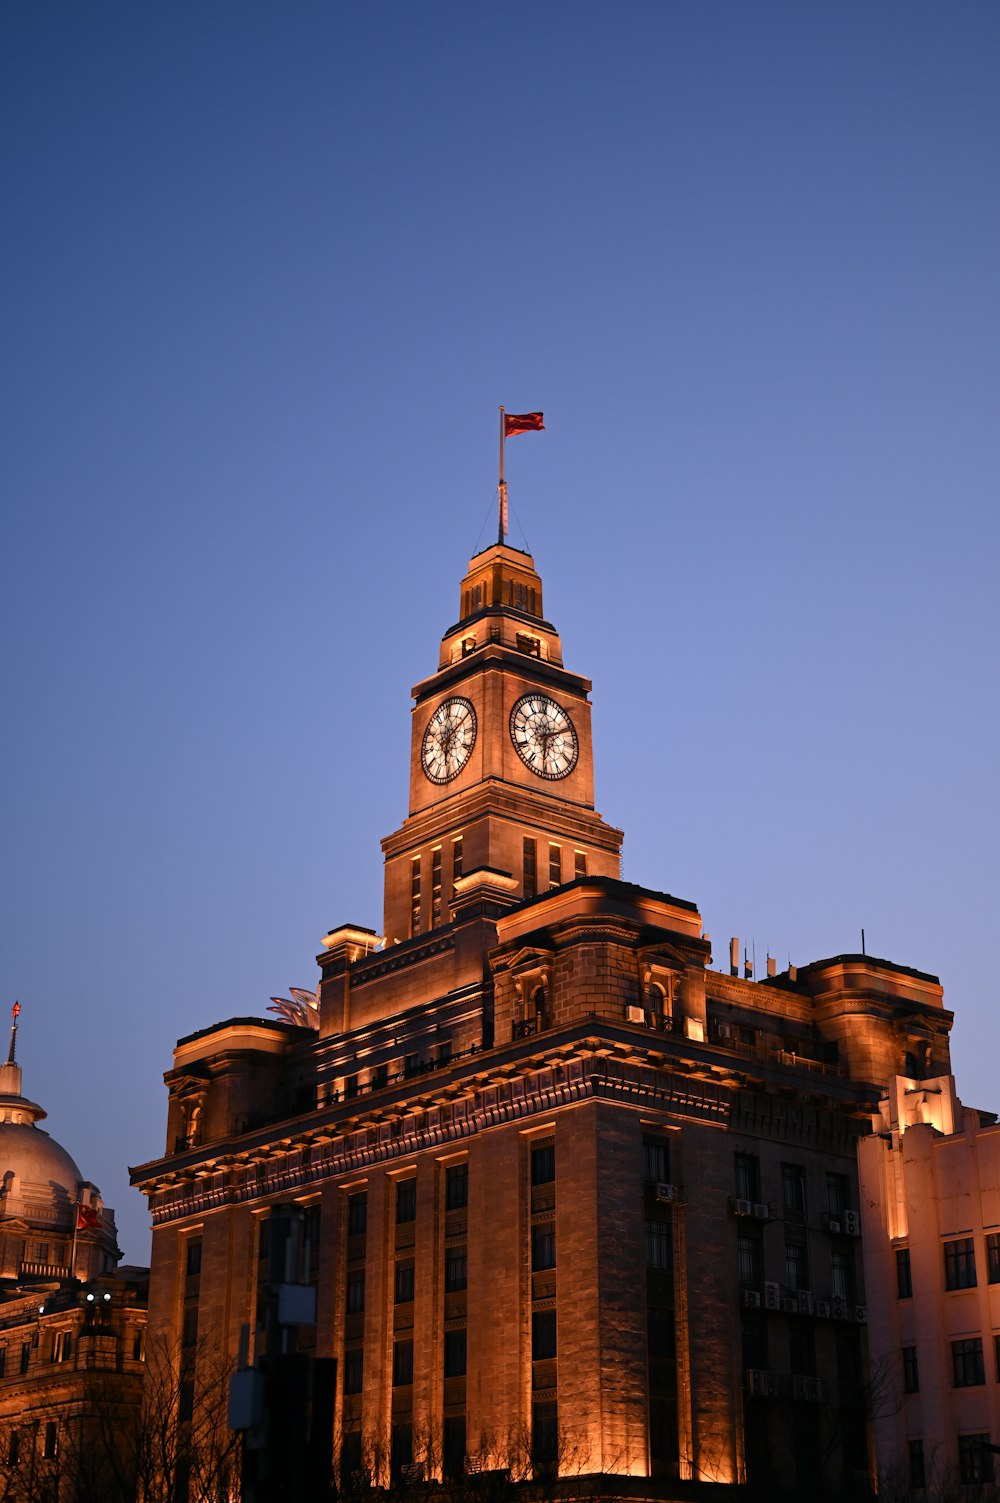 a building with a clock tower lit up at night